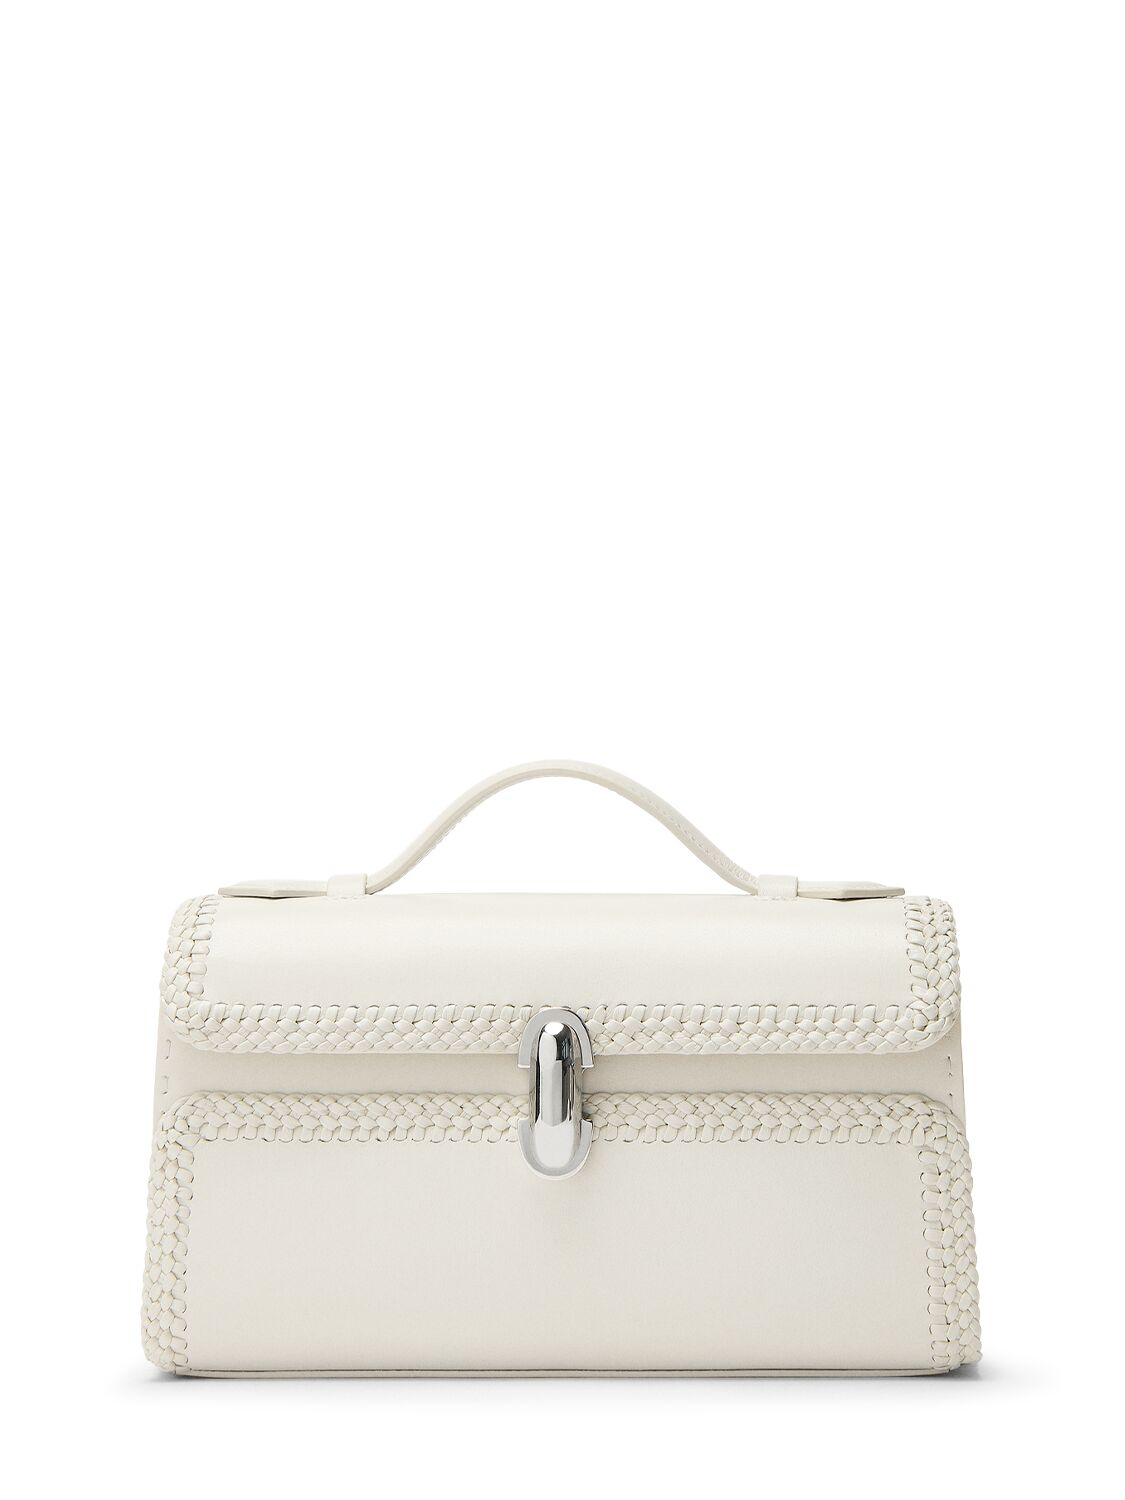 Savette The Symmetry Woven-edge Smooth Leather In Ivory